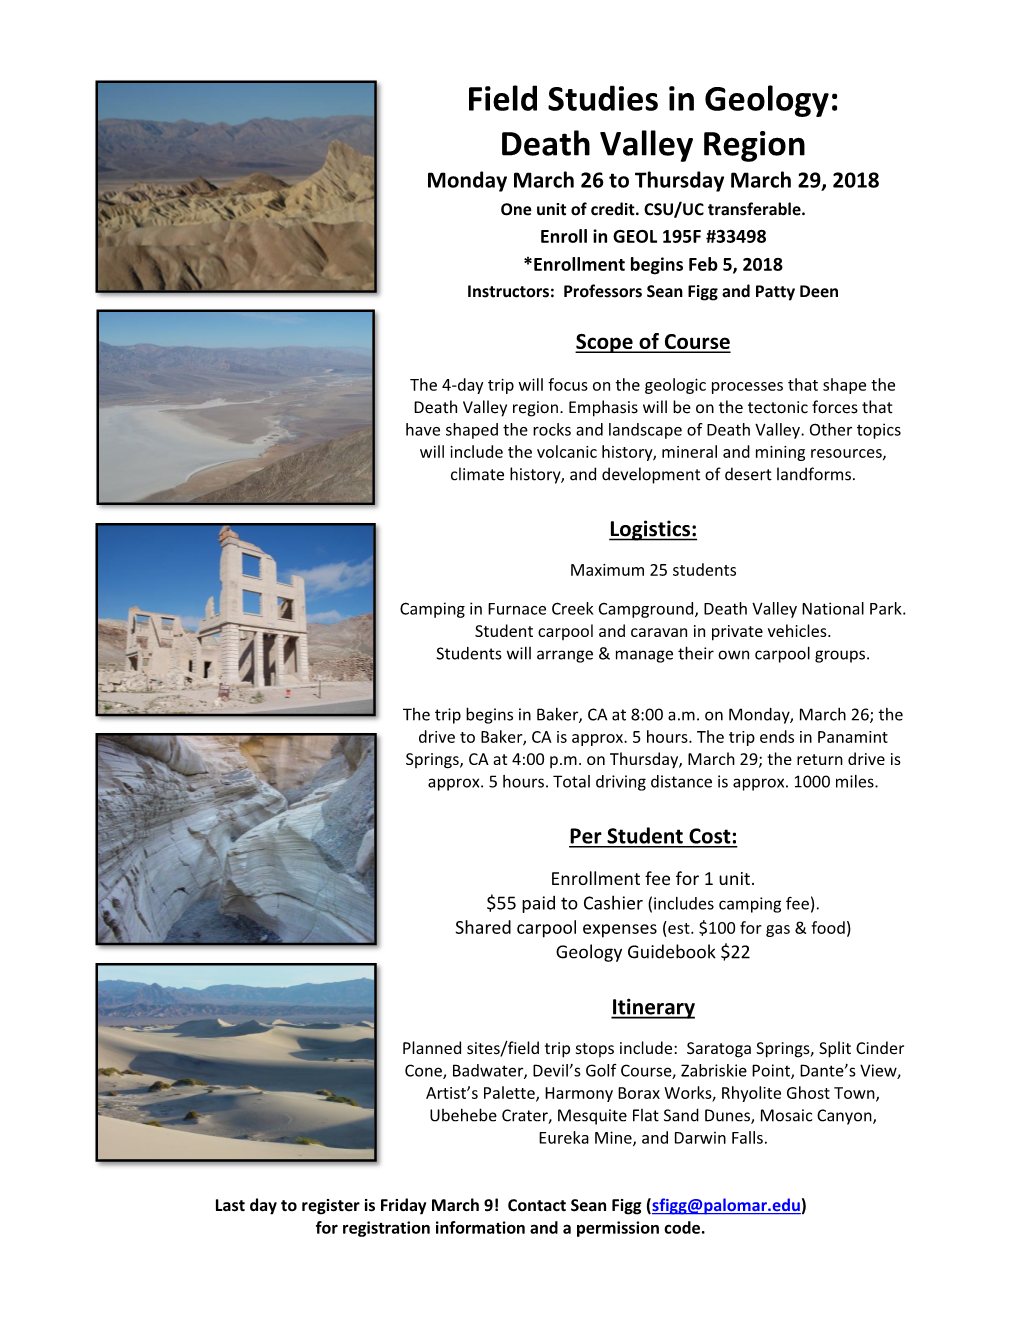 Field Studies in Geology: Death Valley Region Monday March 26 to Thursday March 29, 2018 One Unit of Credit